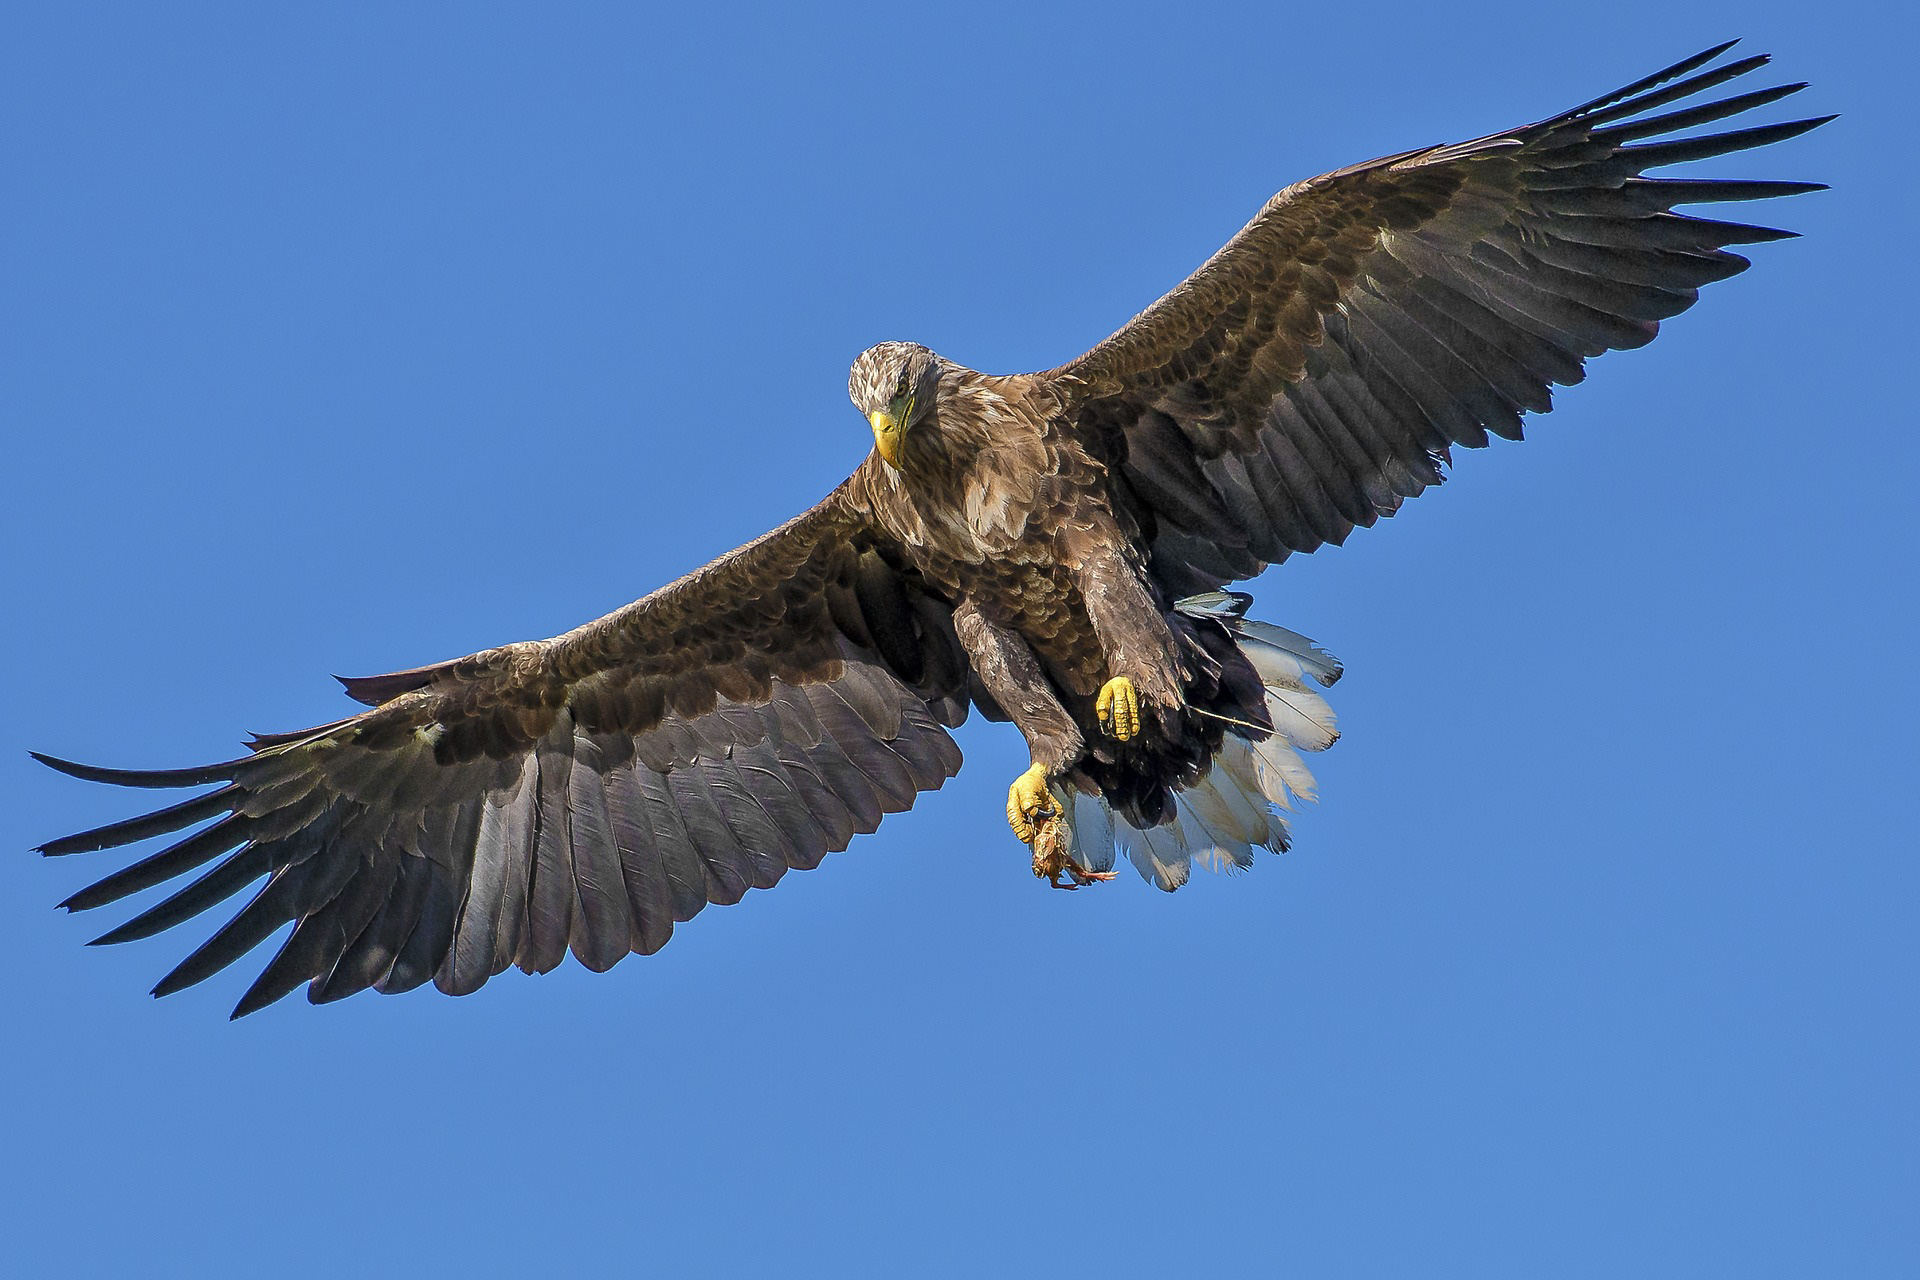 An eagle with prey clenched in its right claw. Credit pixabay.com.